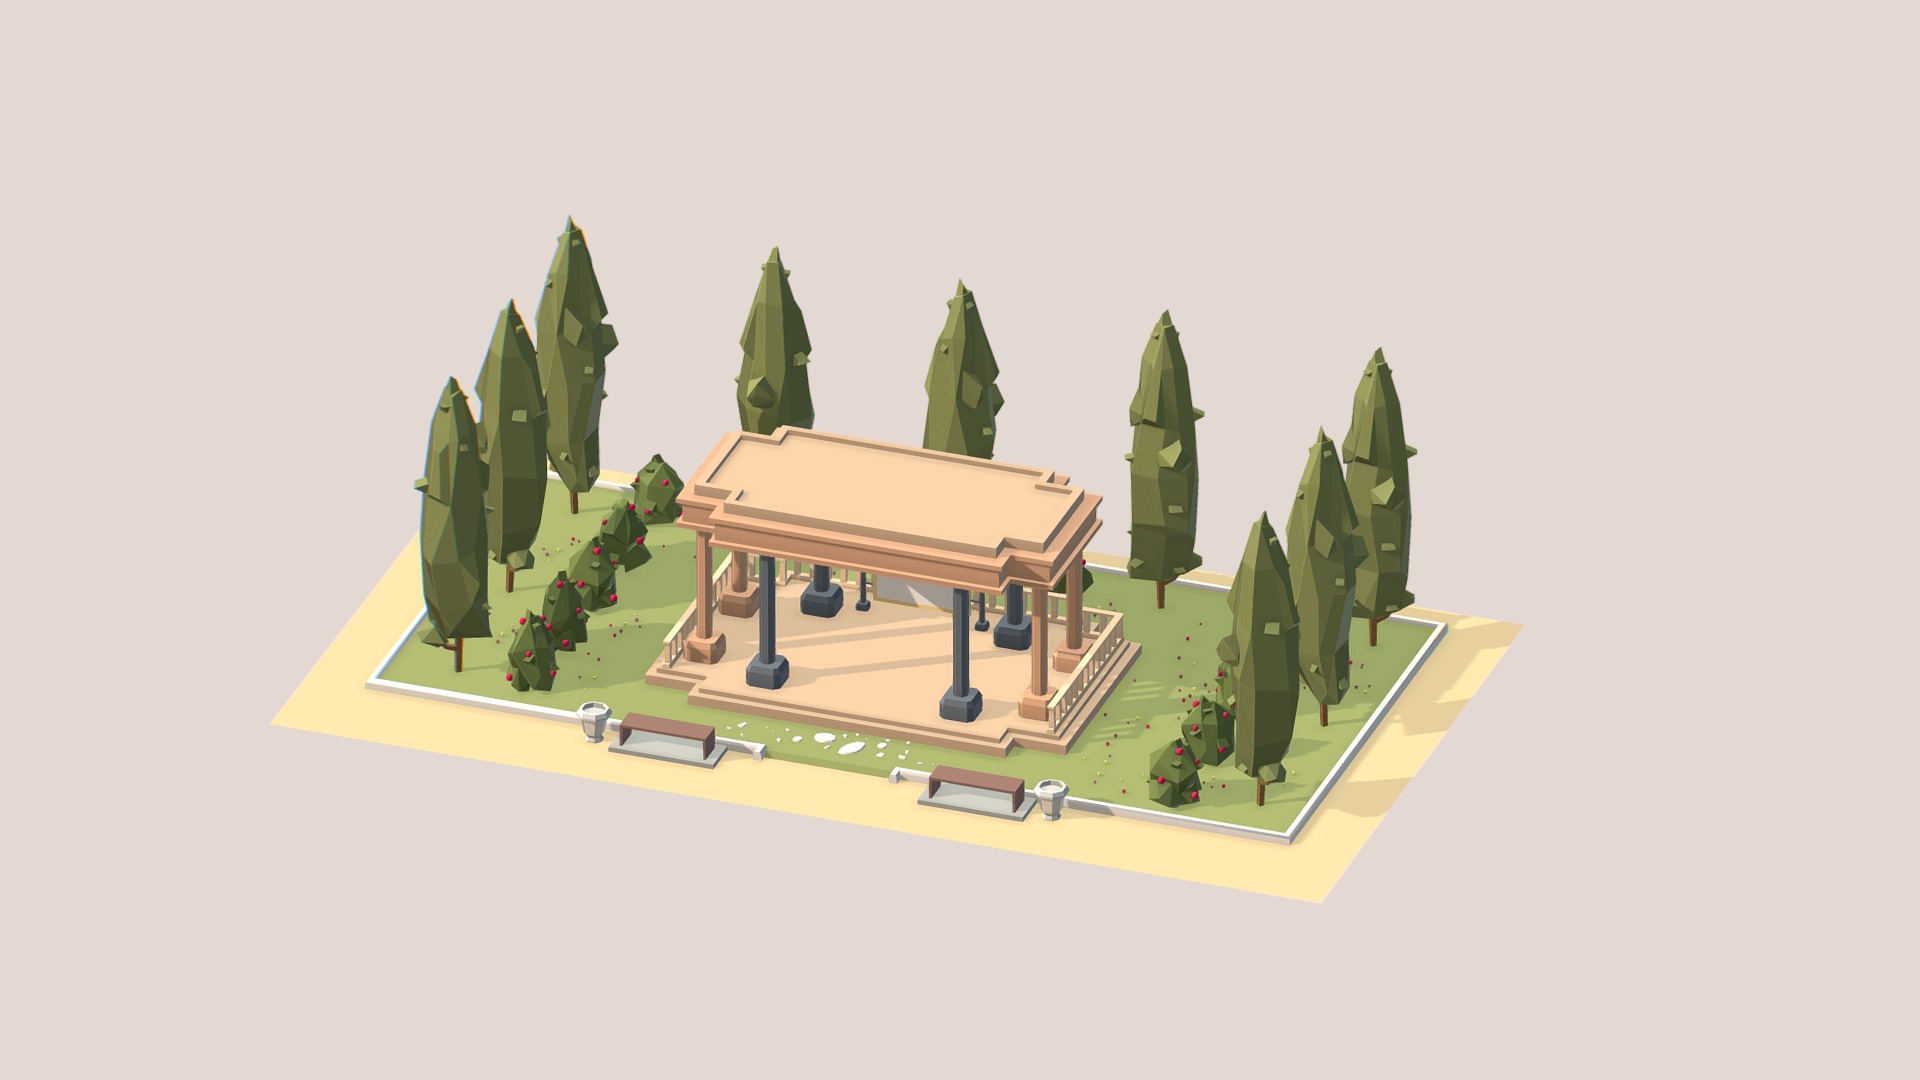 3D model Ethnic Buildings 04 - This is a 3D model of the Ethnic Buildings 04. The 3D model is about a toy house with trees.